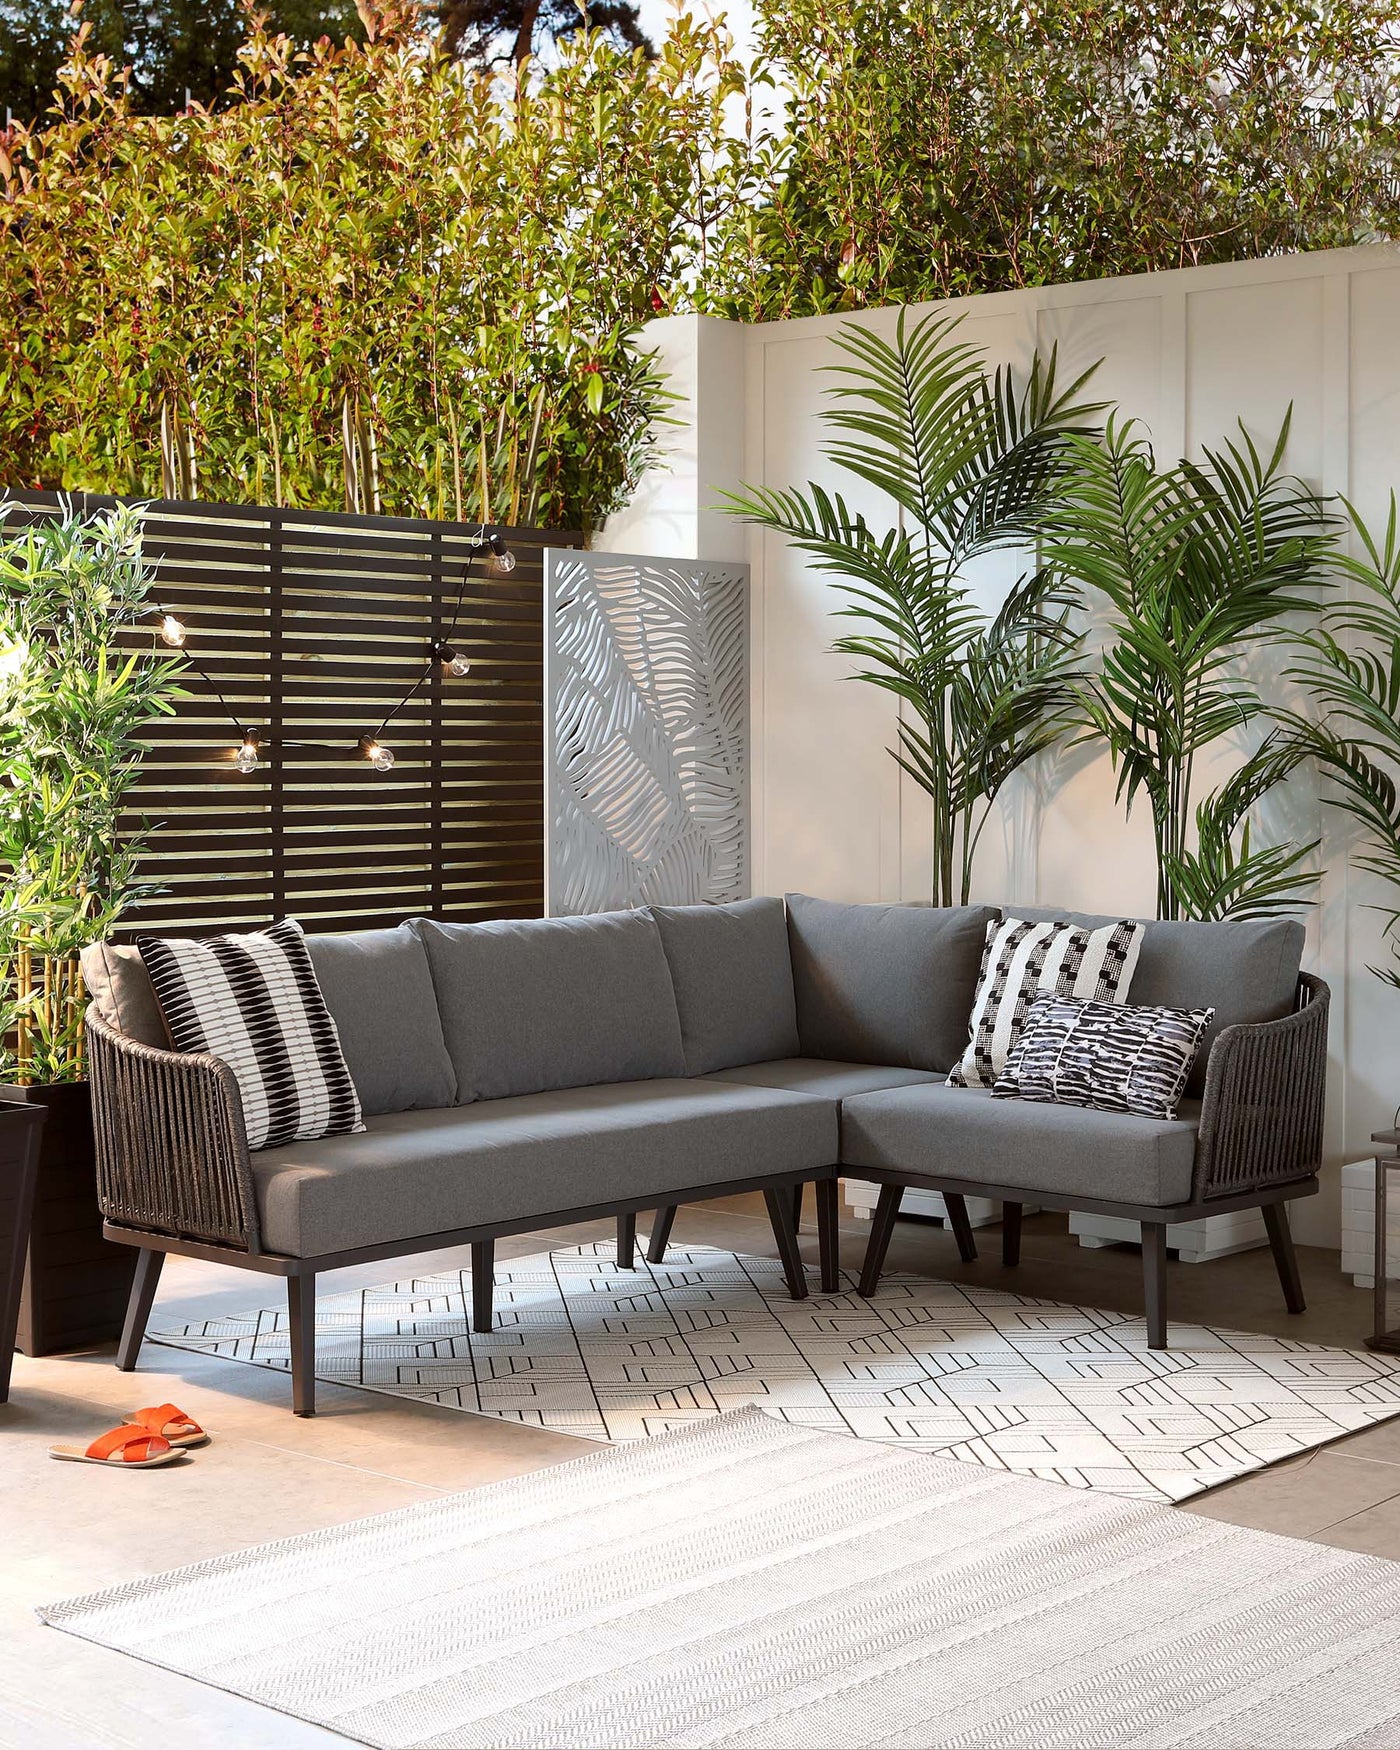 L-shaped outdoor sectional sofa with grey upholstered cushions and woven side detailing on a geometric-patterned area rug.